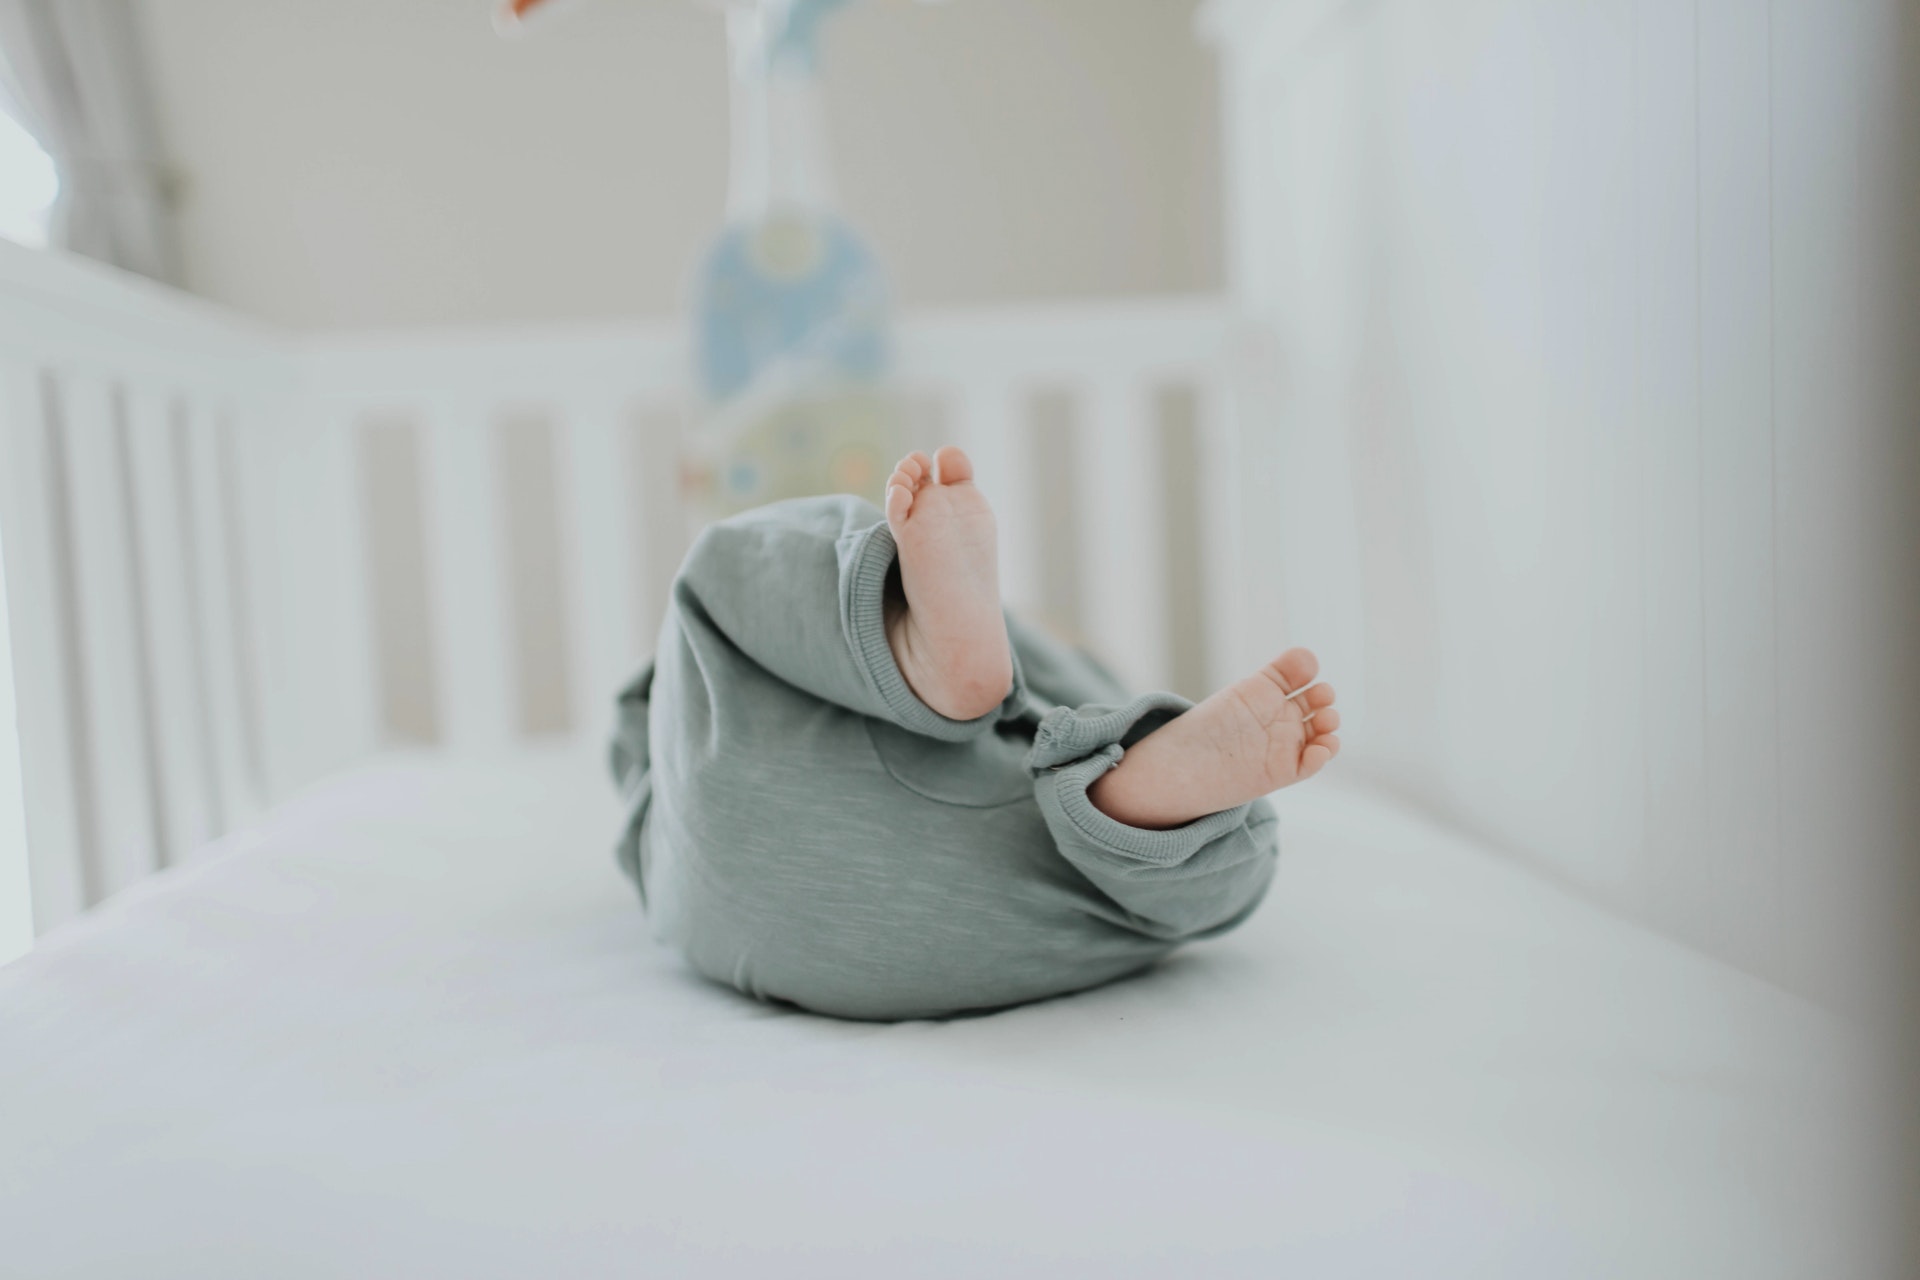 sleep training pros and cons list for new moms